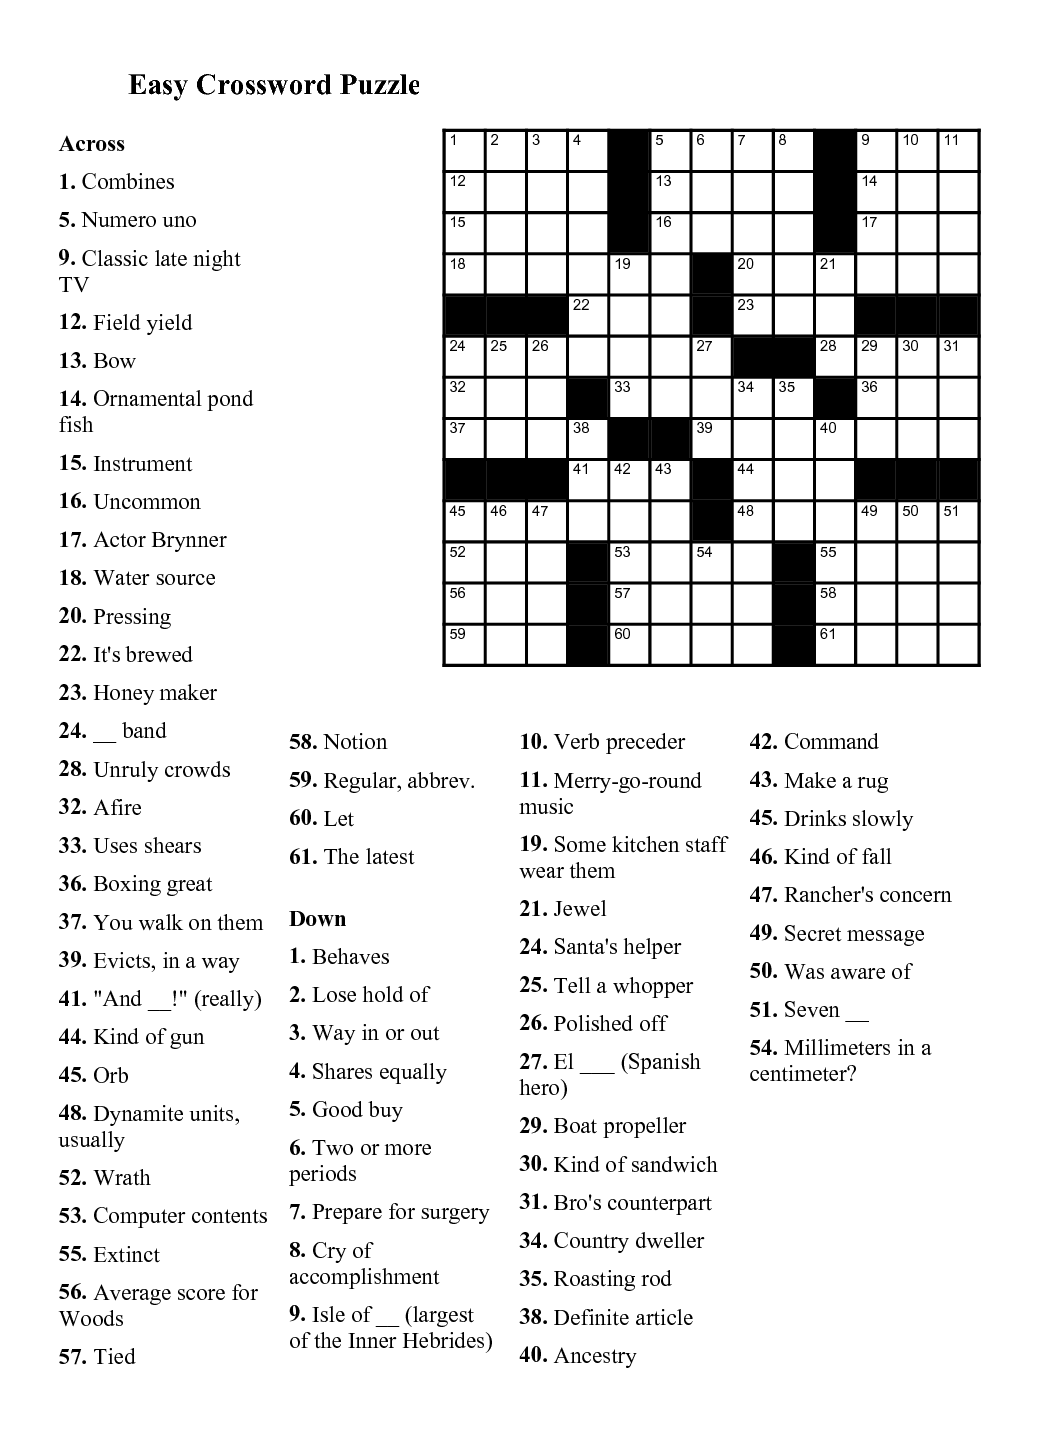 Easy Crossword Puzzles Printable Daily Template - Free Easy Crossword Puzzle Printable